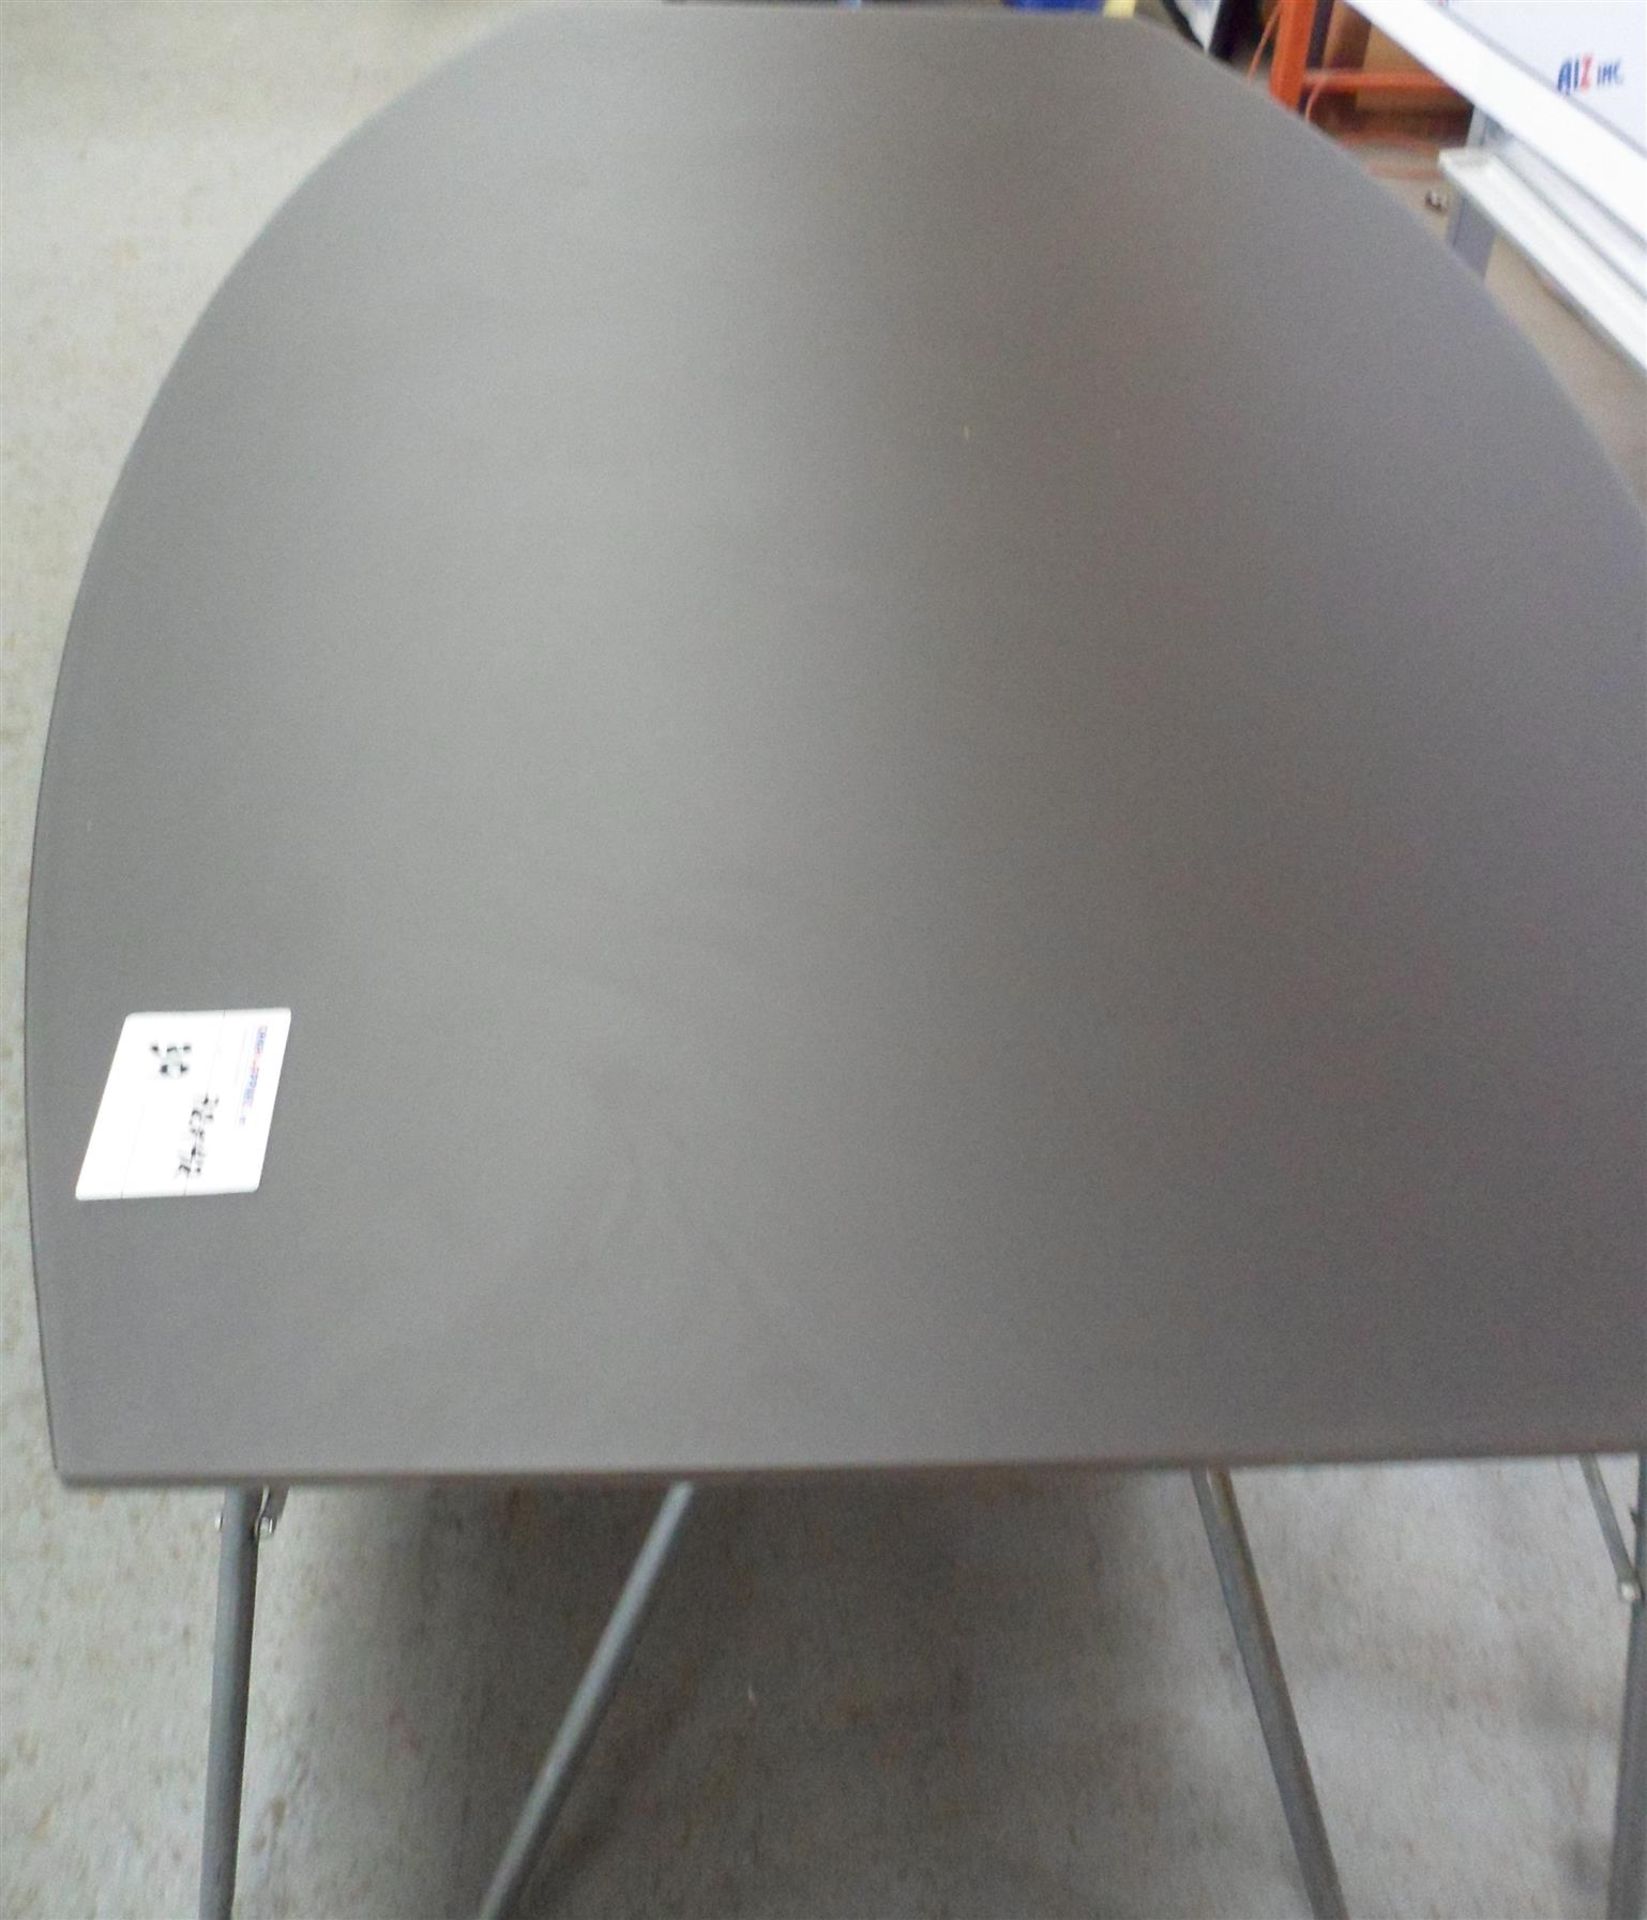 CURVED GLASS TABLE TOP - 72" X 42" - Image 2 of 3